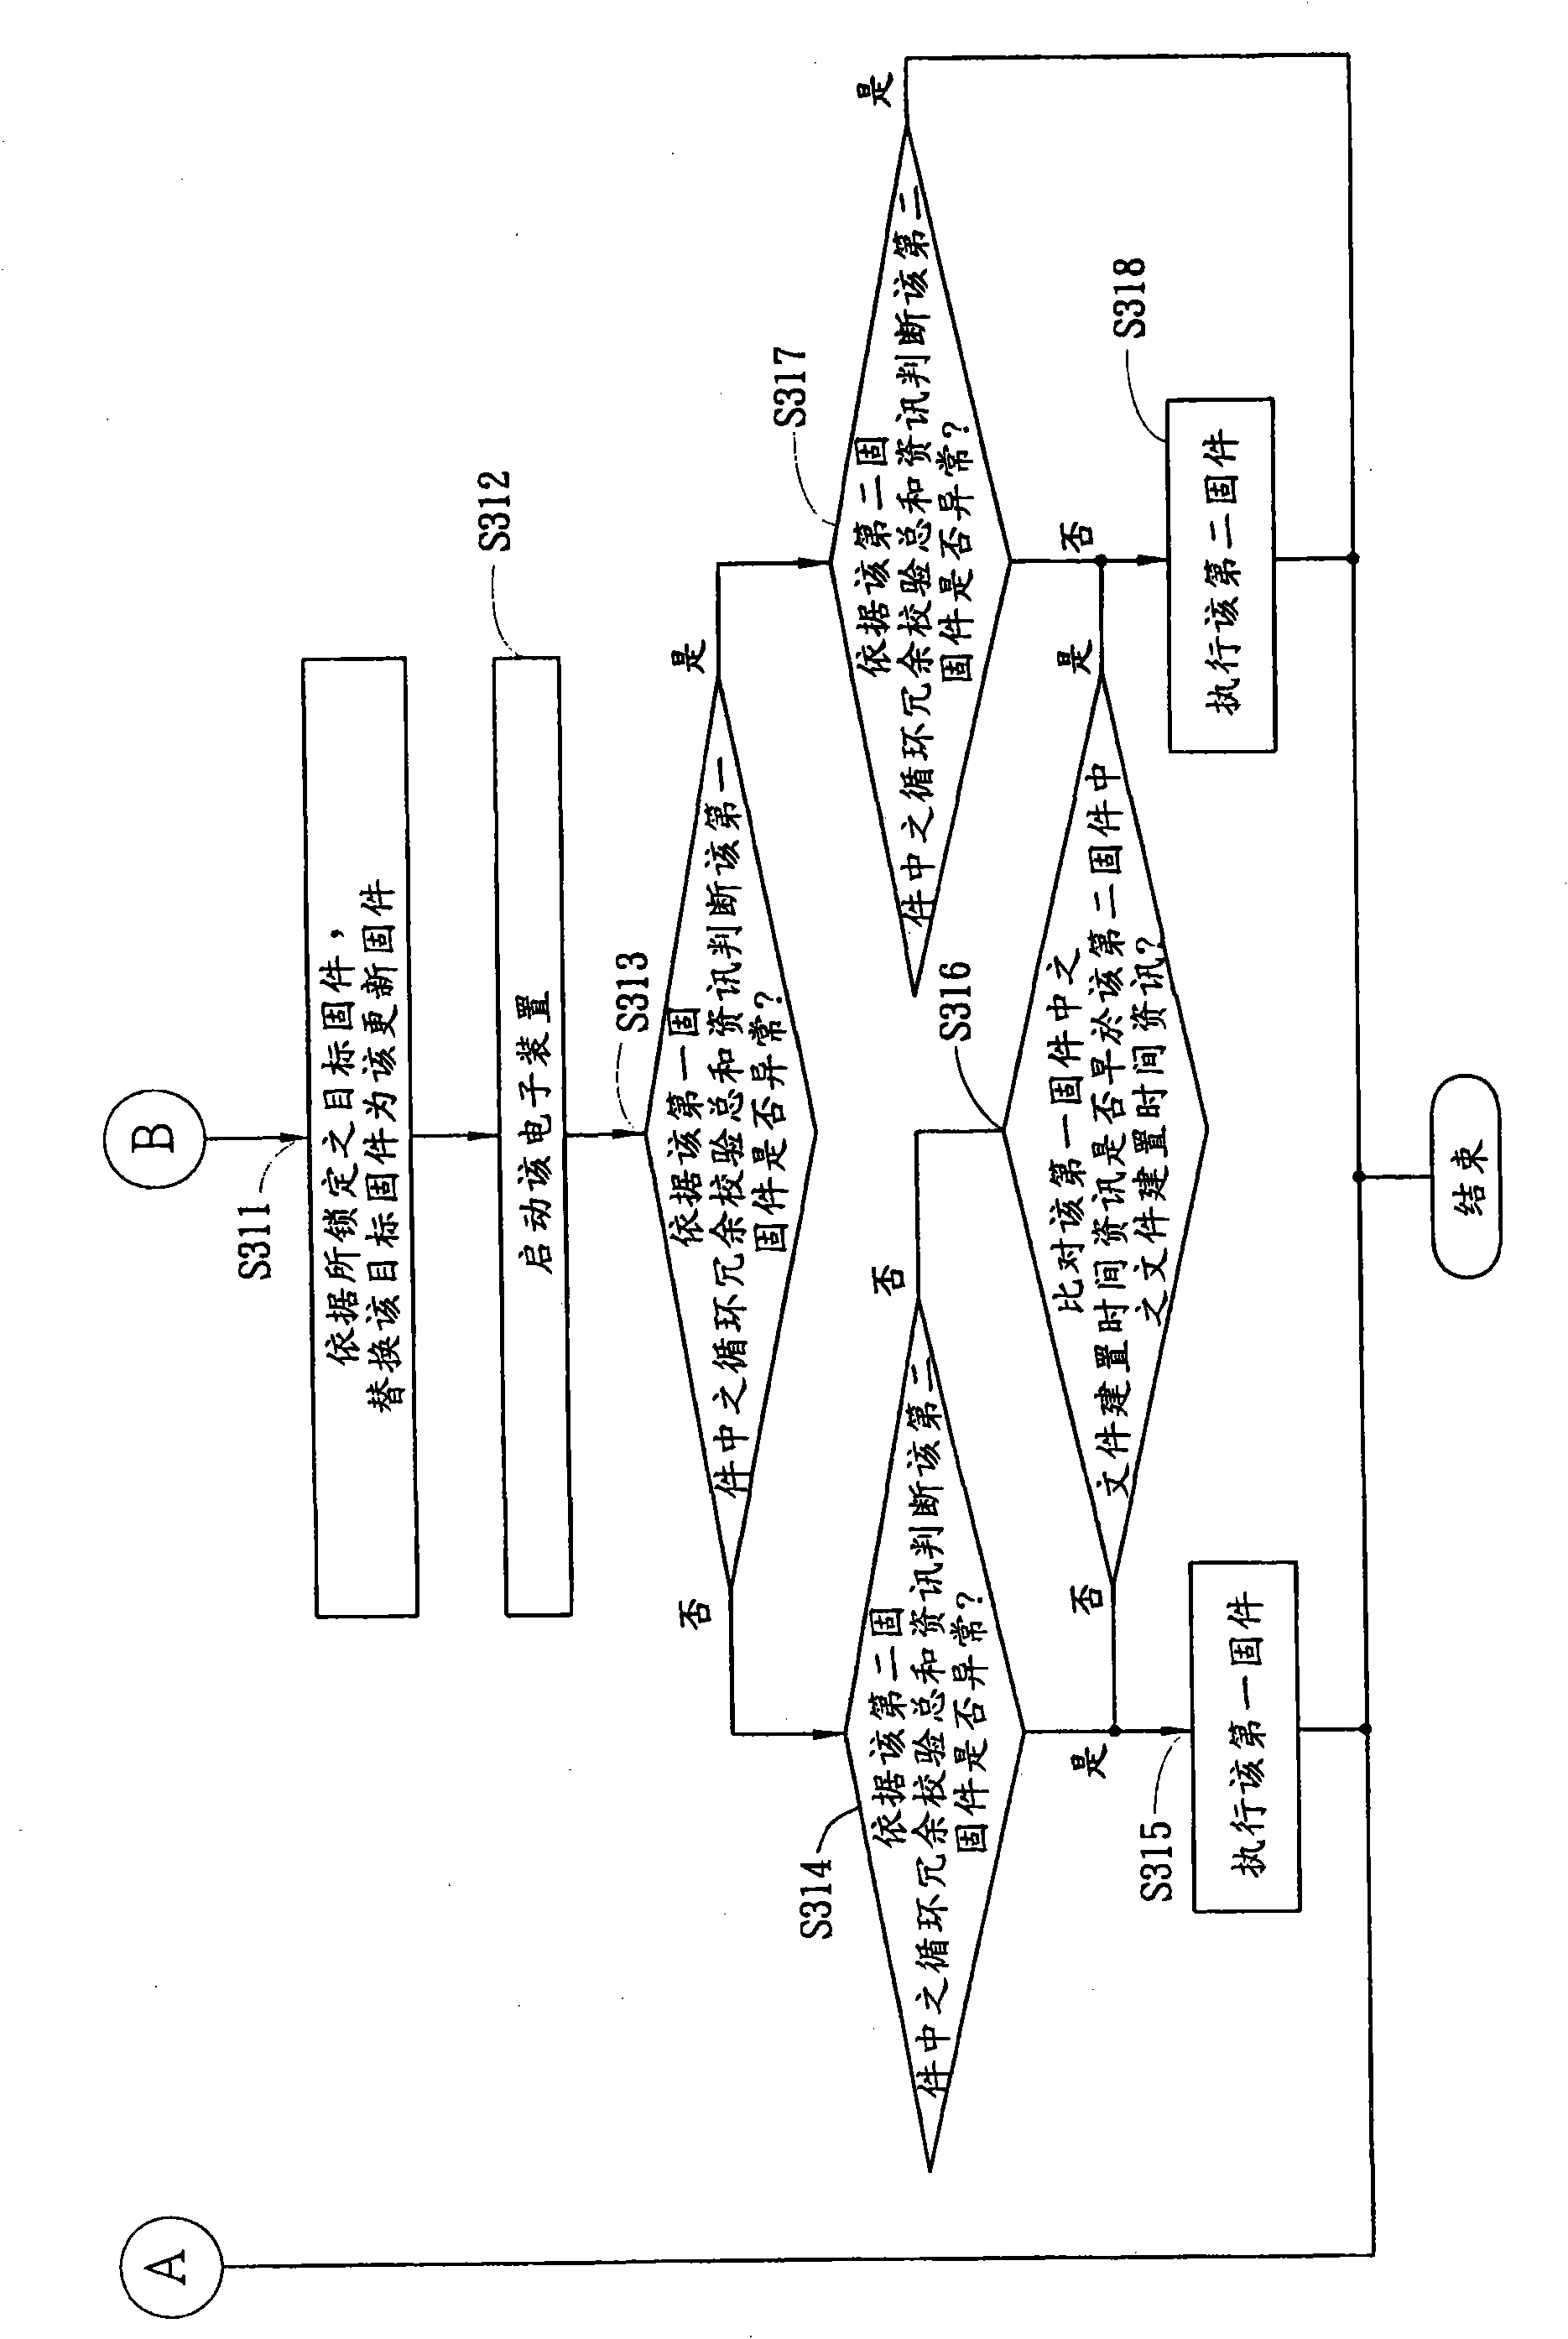 Firmware update system, method and building method of firmware of firmware update system